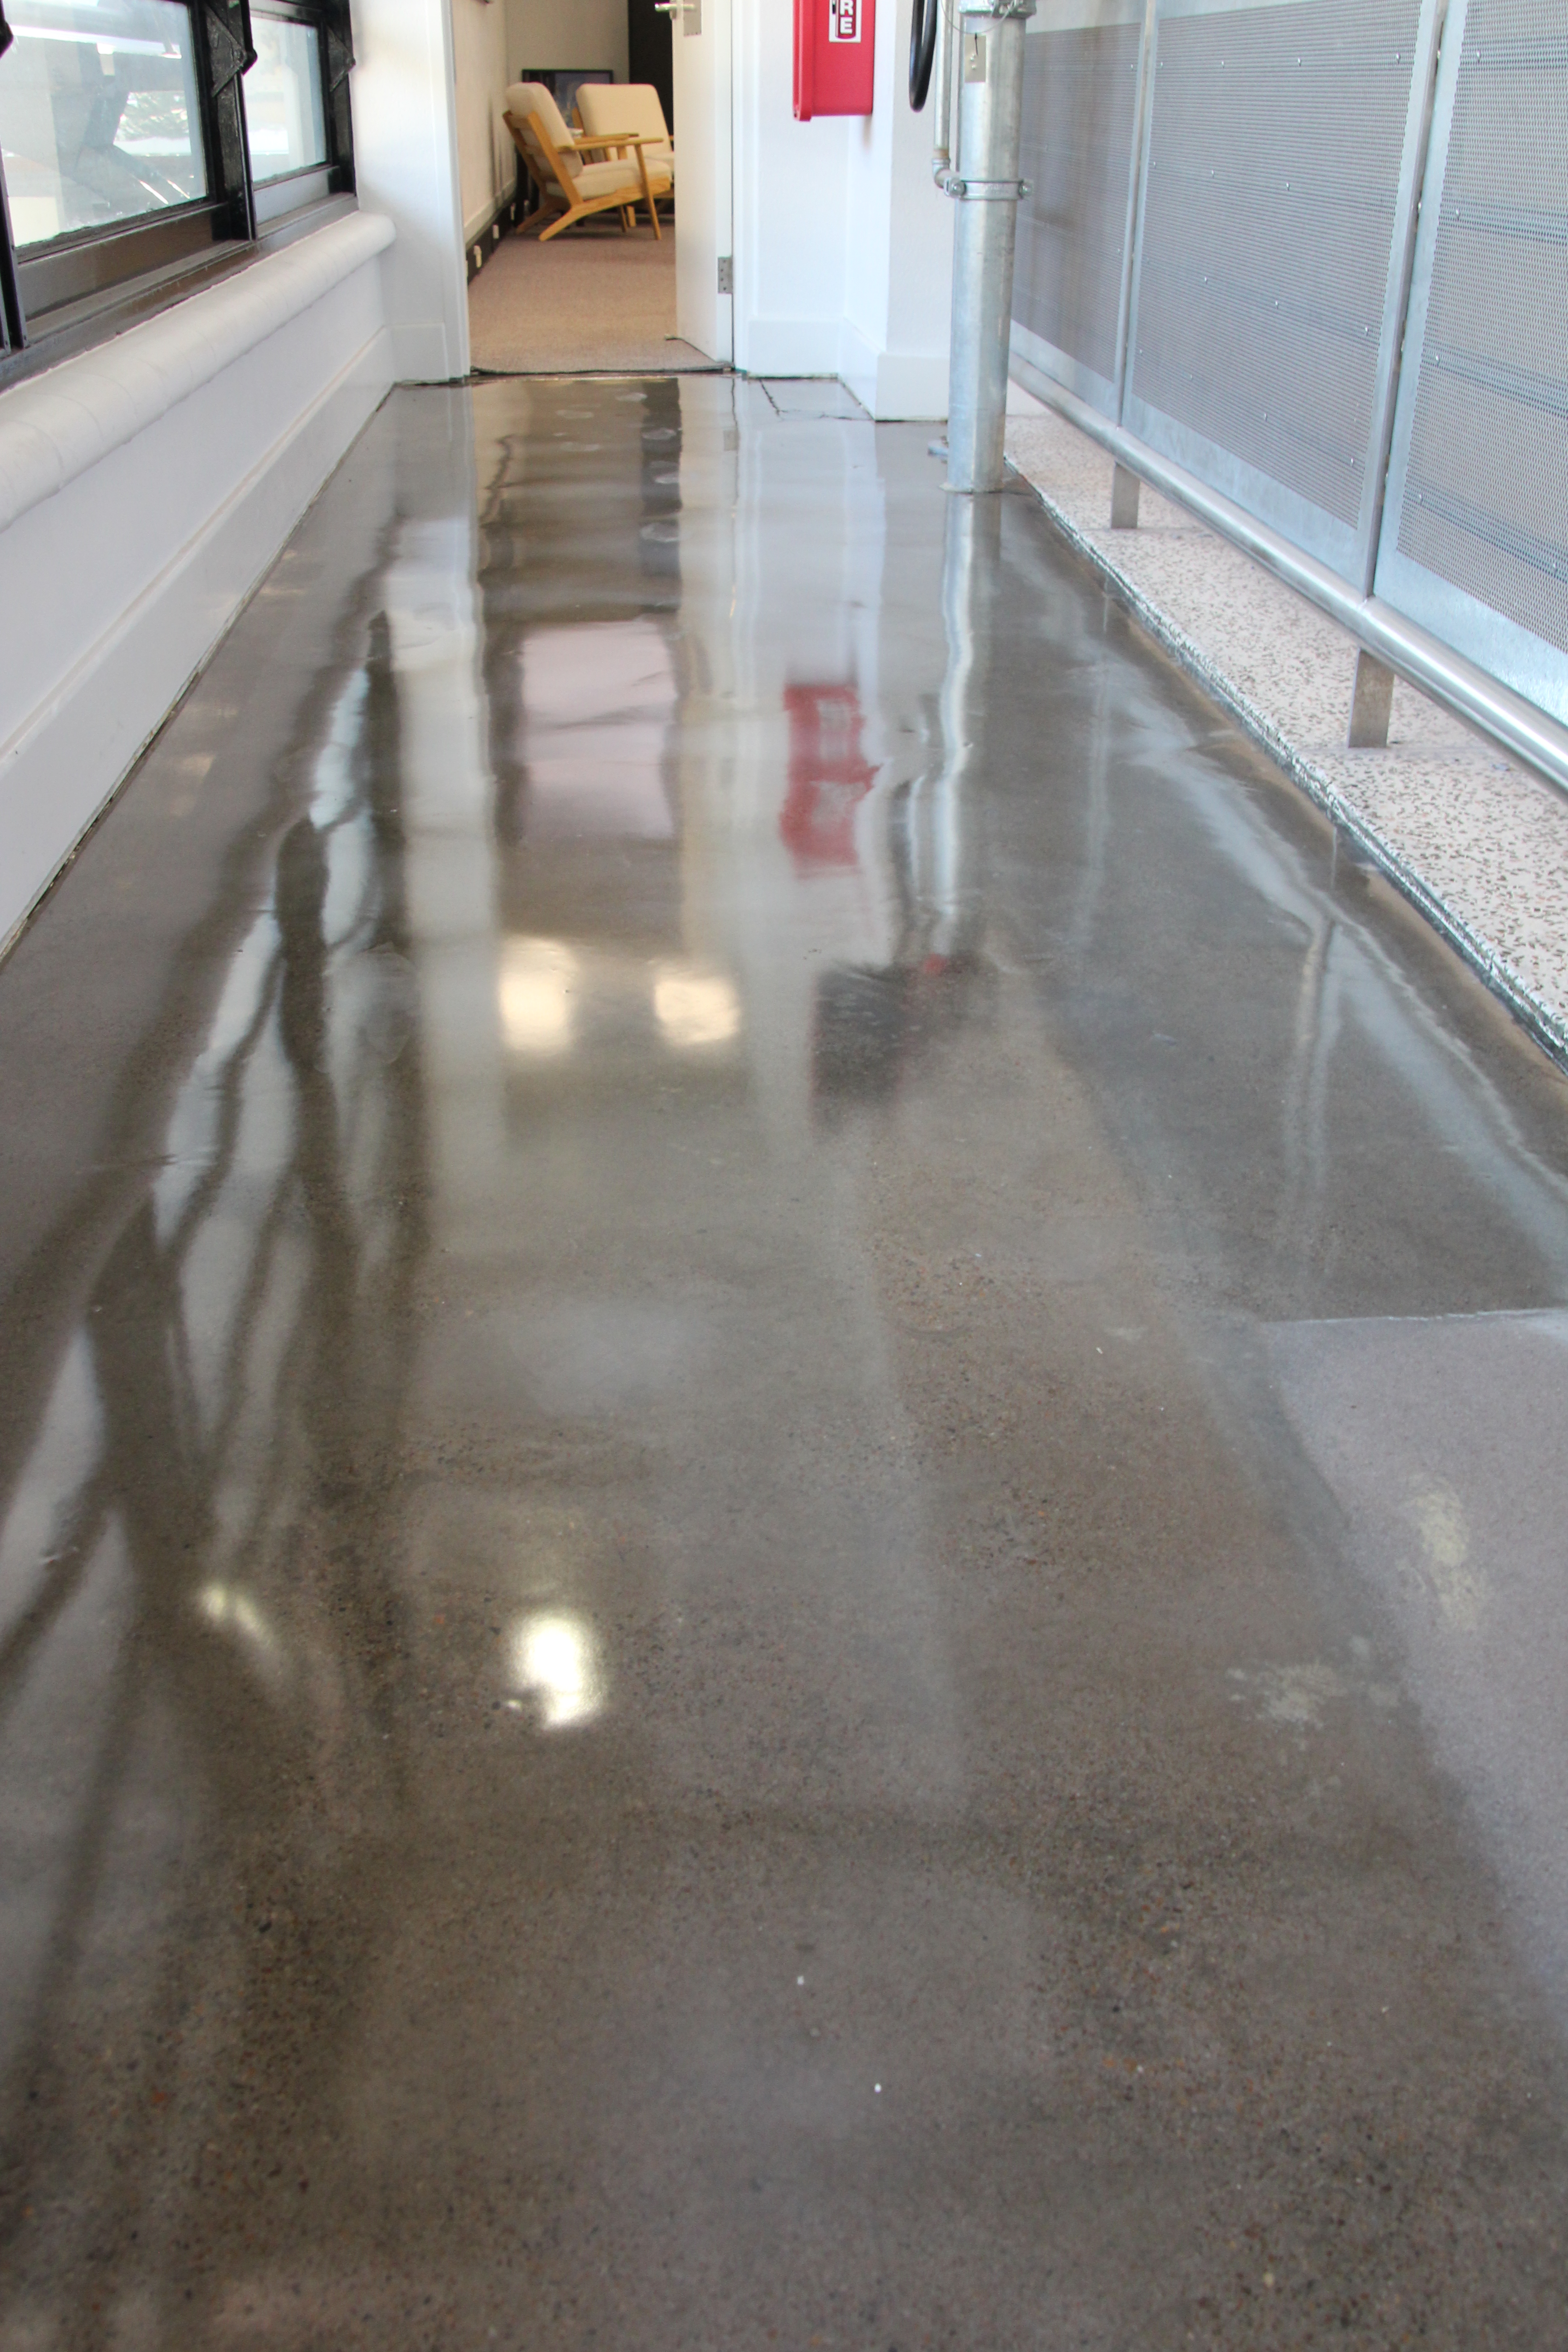 A low-angle shot showing the semi-gloss finish that was achieved on the polished concrete look for this floor.